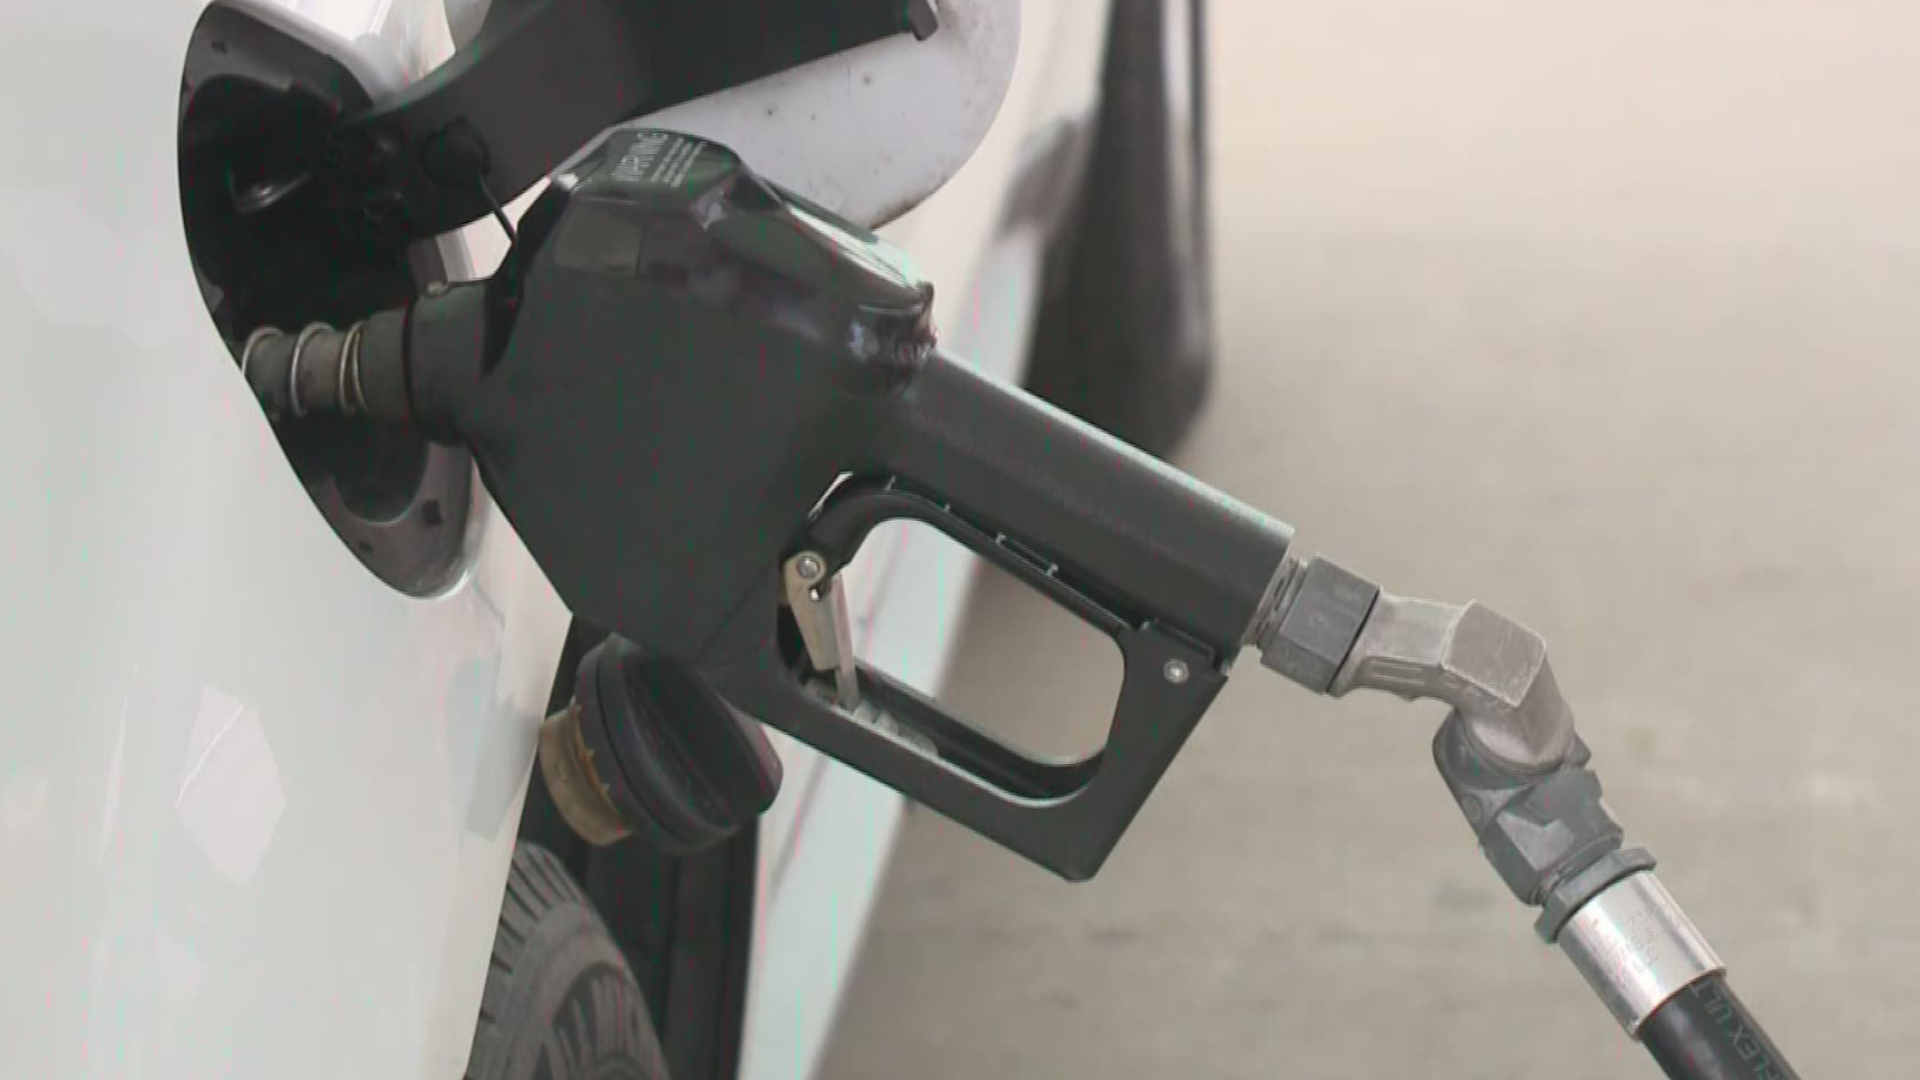 Police are looking for two people who carjacked a woman at gunpoint while she was pumping gas.